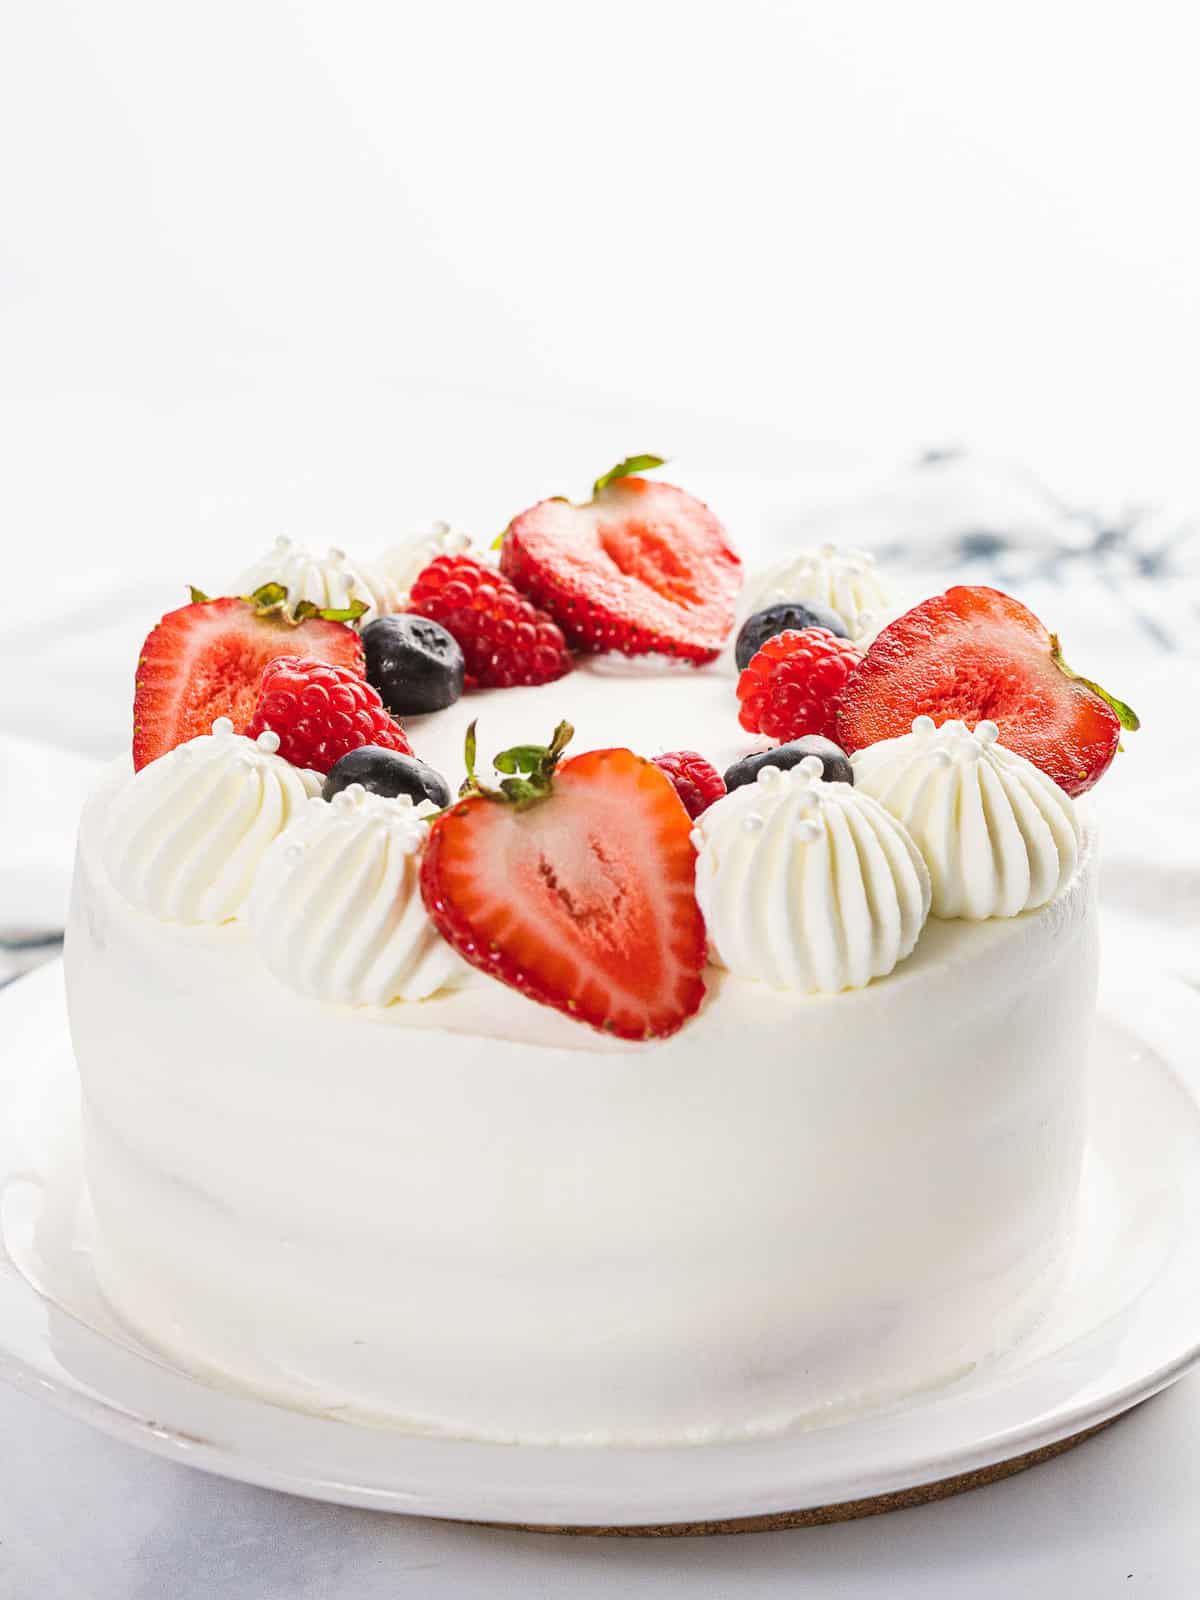 Fluffy berry Chantilly cake with strawberries, blueberries, and Chantilly cream.